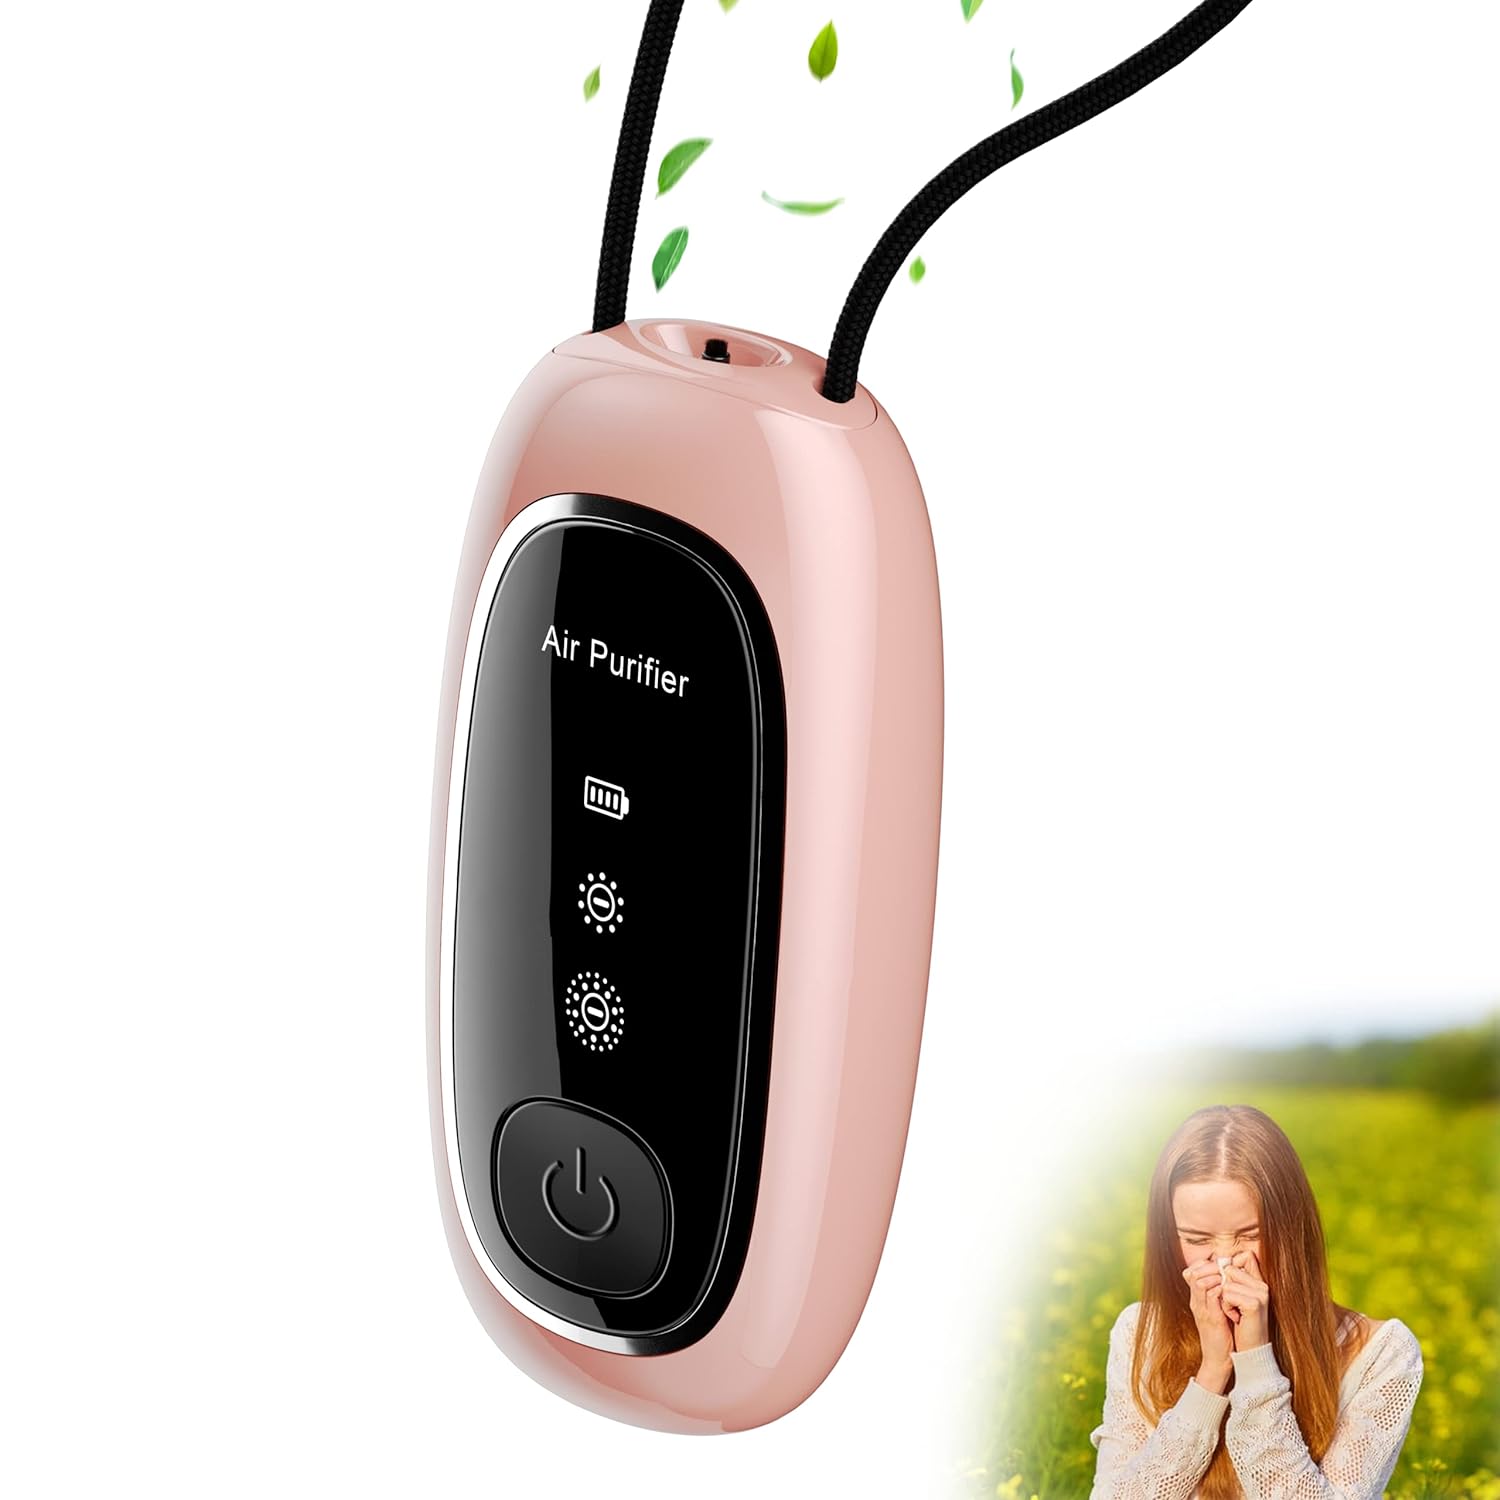 Personal Air Purifier,Roseplay A10 Portale Air Purifier, Necklace Version, Two Gears of Negative Ions,Wearable anywhere for Travel, Airplane, Office, Home,Pink